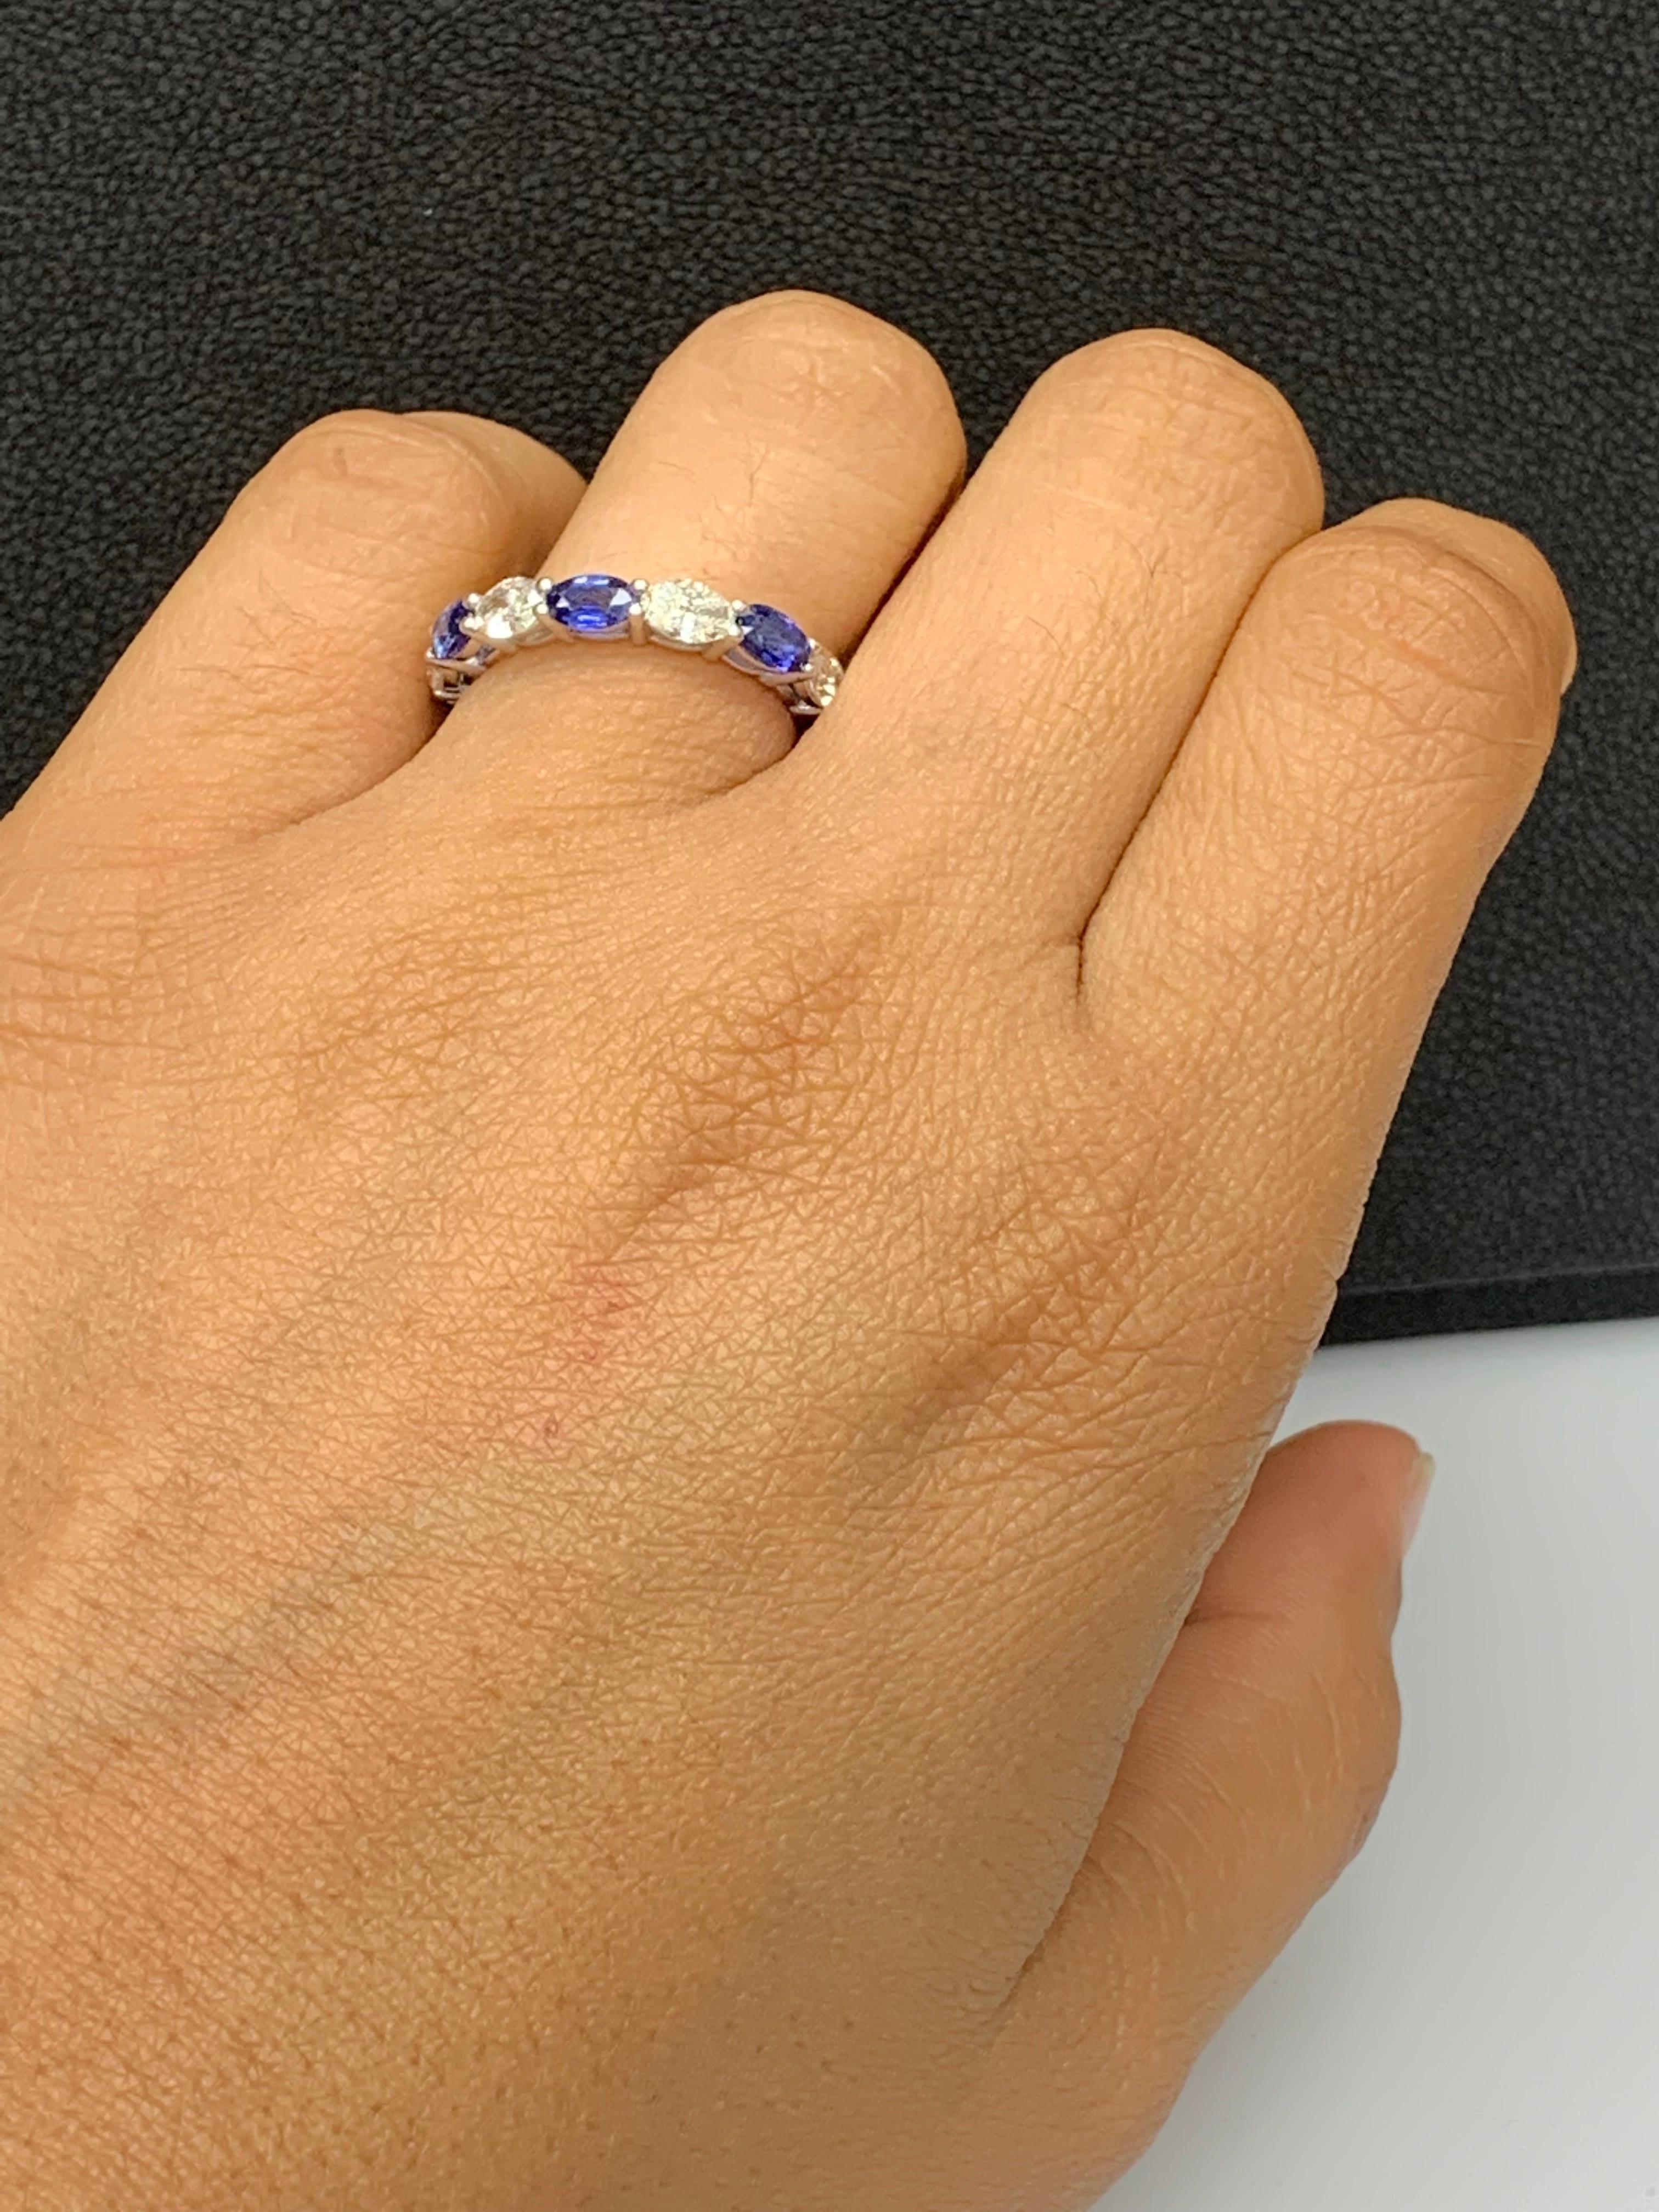 Handcrafted to perfection; showcasing color-rich oval cut sapphires that elegantly alternate brilliant oval cut diamonds in a 14k white gold setting. 
The 7 sapphires weigh 2.09 carats total and 7 diamonds weigh 1.41 carats total.

Size 6.5 US